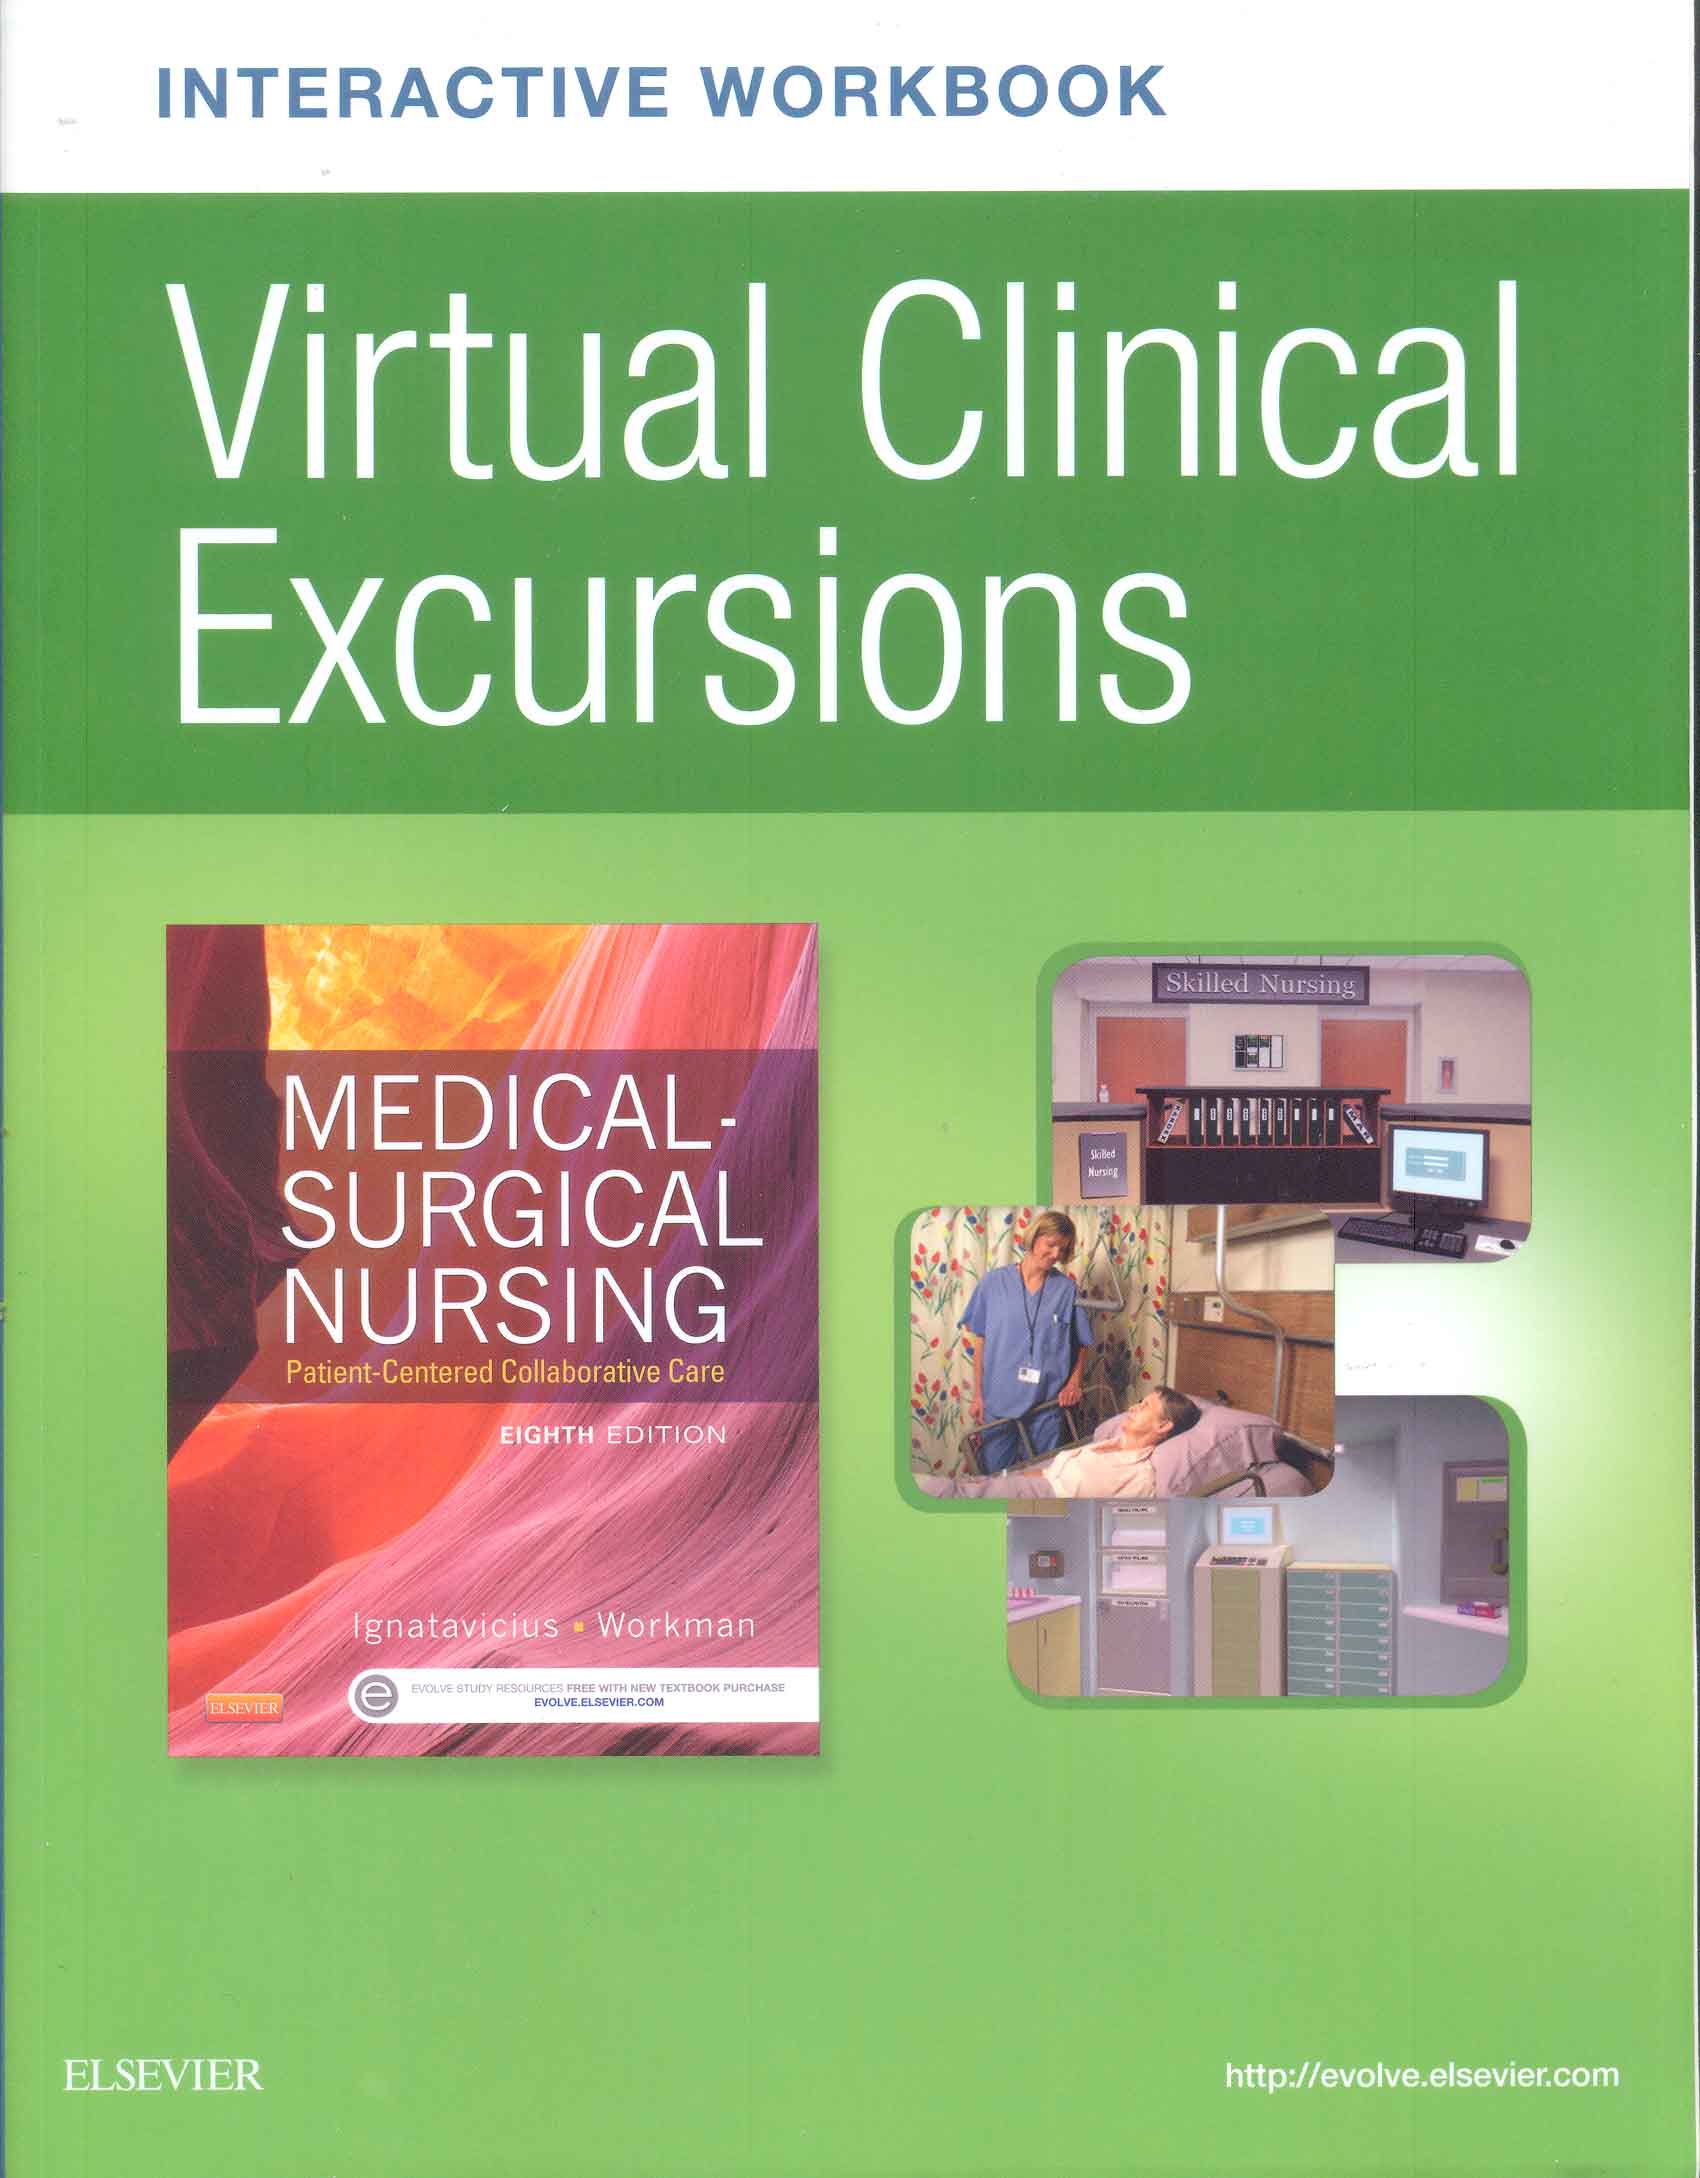 Interactive workbook virtual clinical excursions for ignatavicius and workman : medical - surgical nursing : patient - centered collaborative care